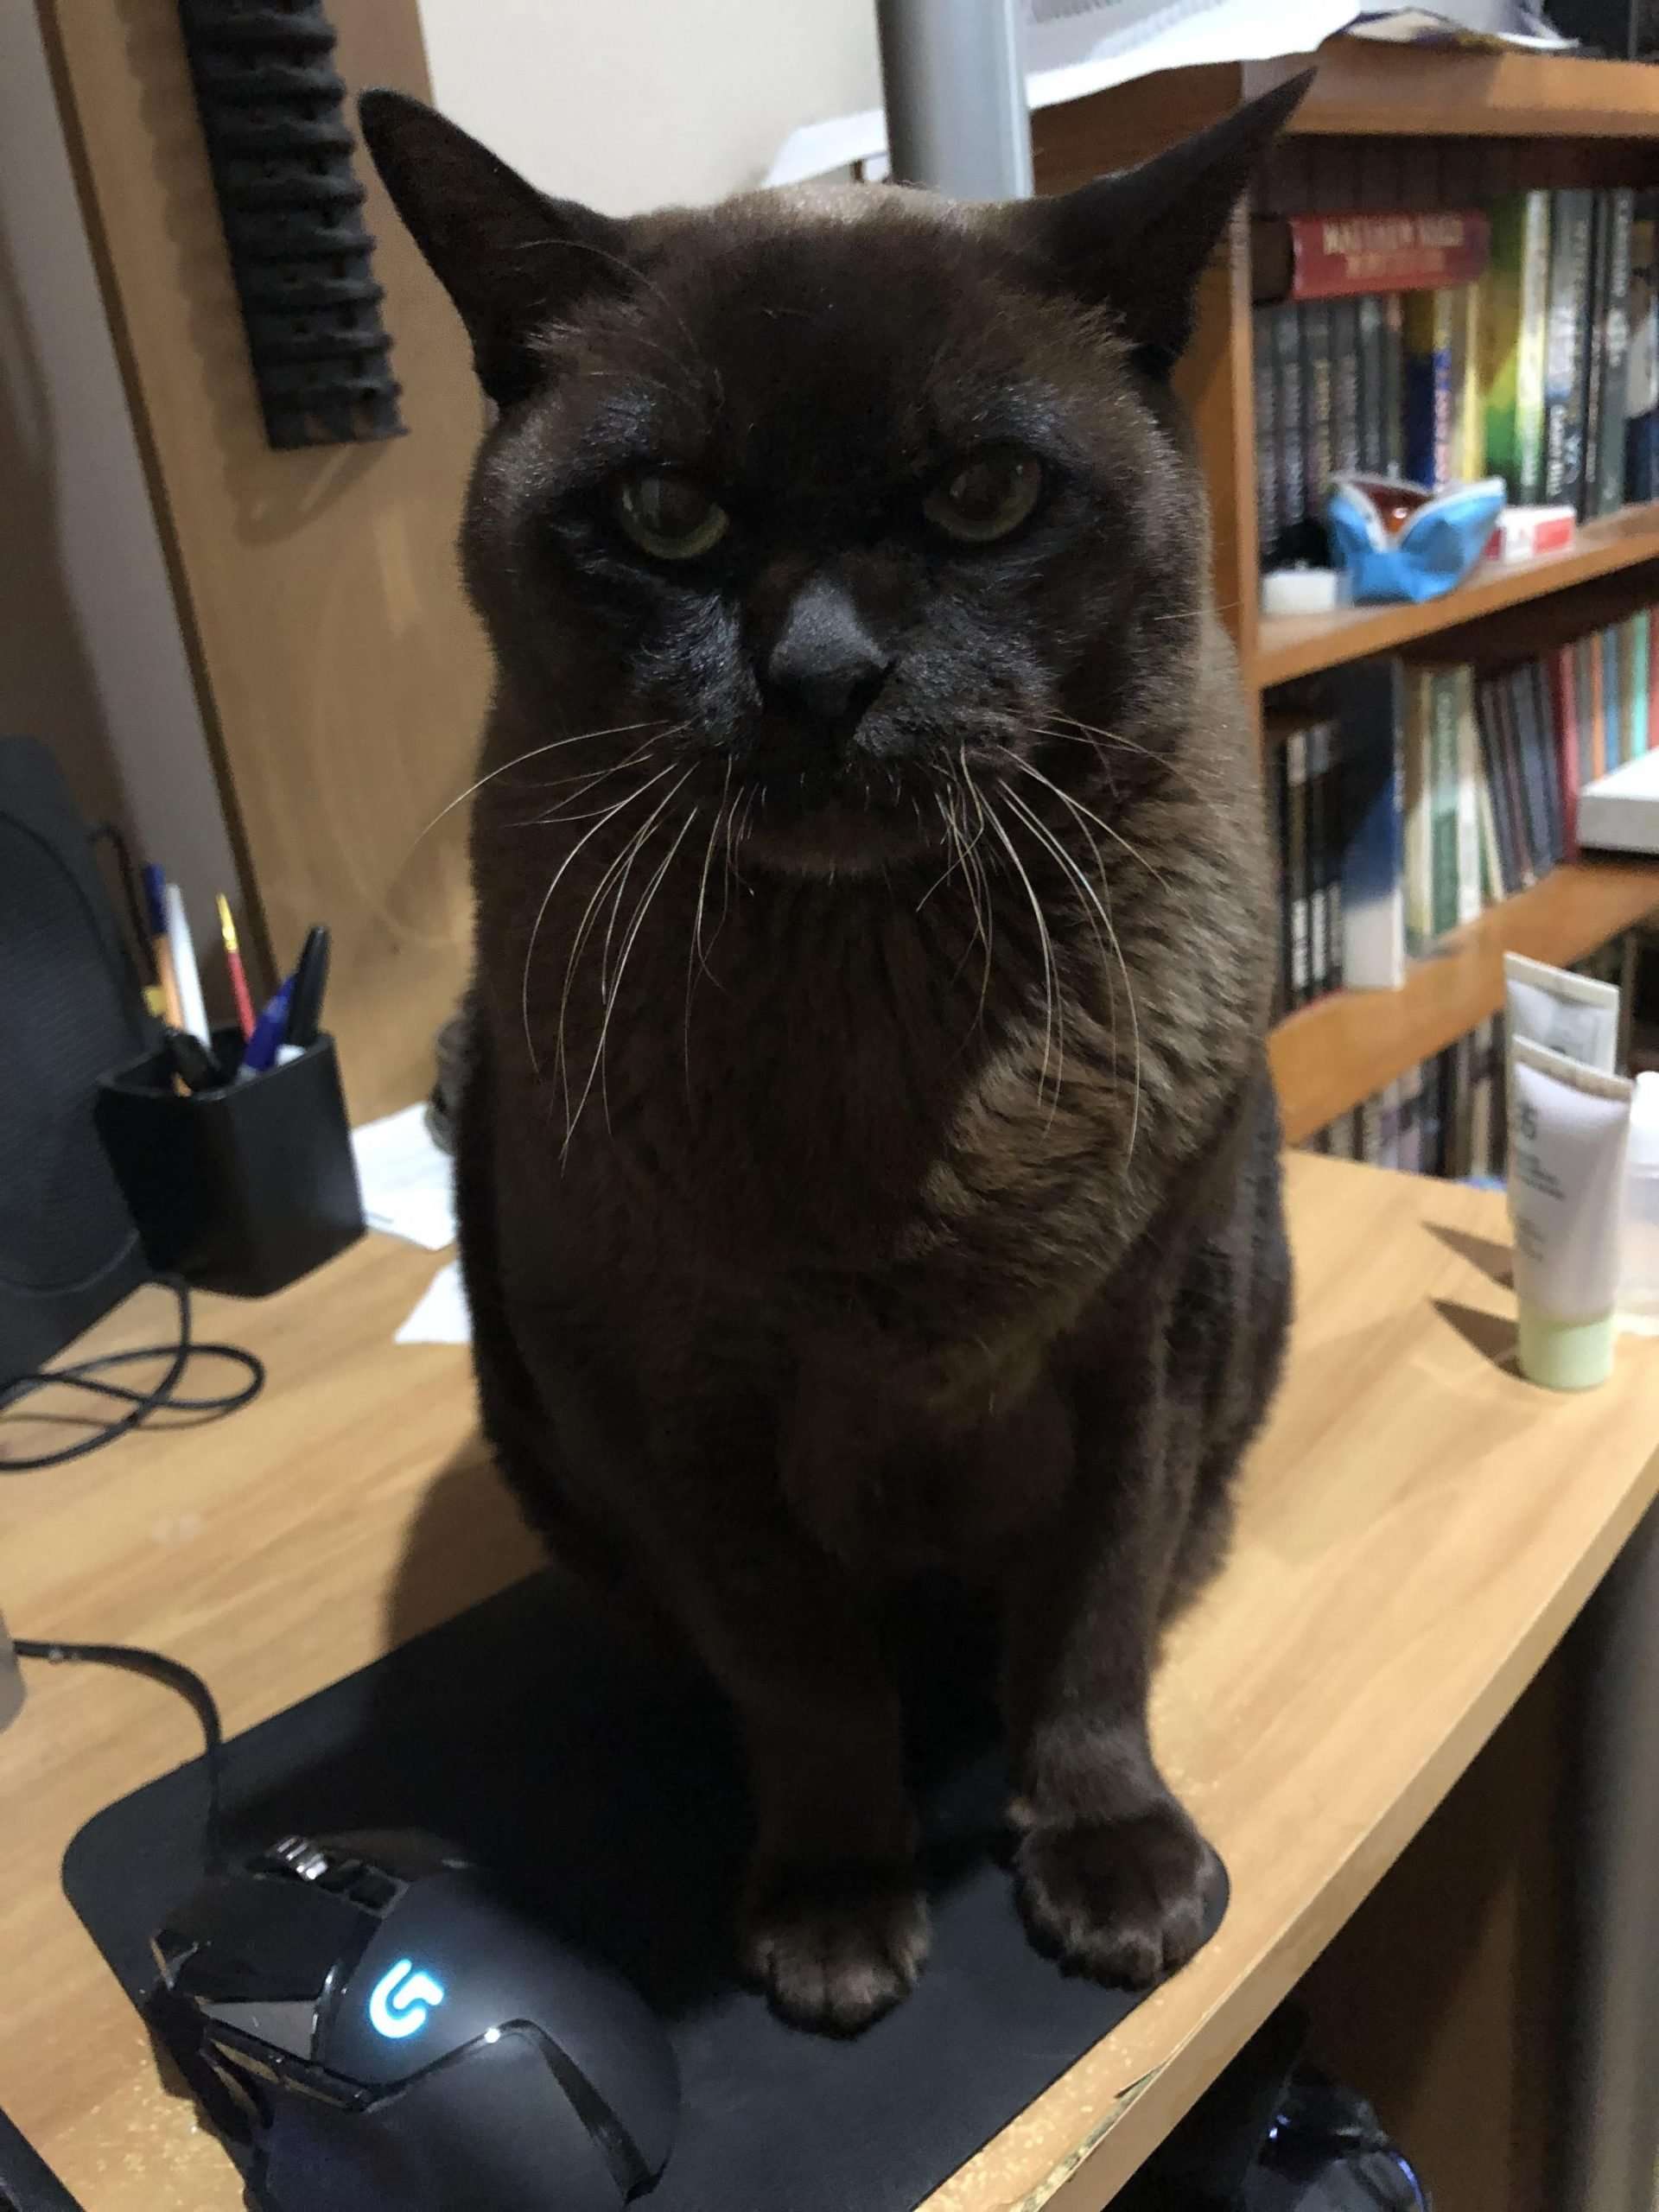 My 14 year old gentlecat